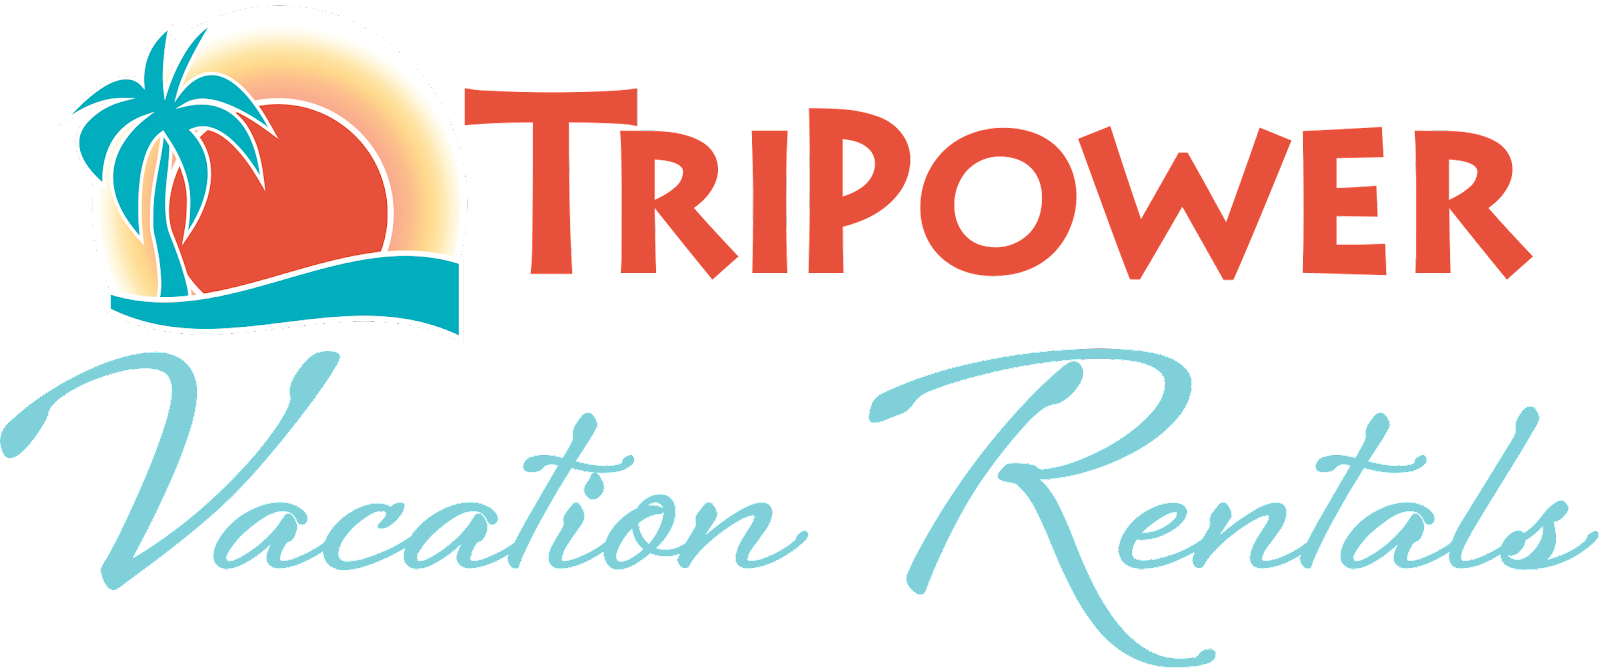 TriPower Vacation Rentals Sun and Palm Tree Logo